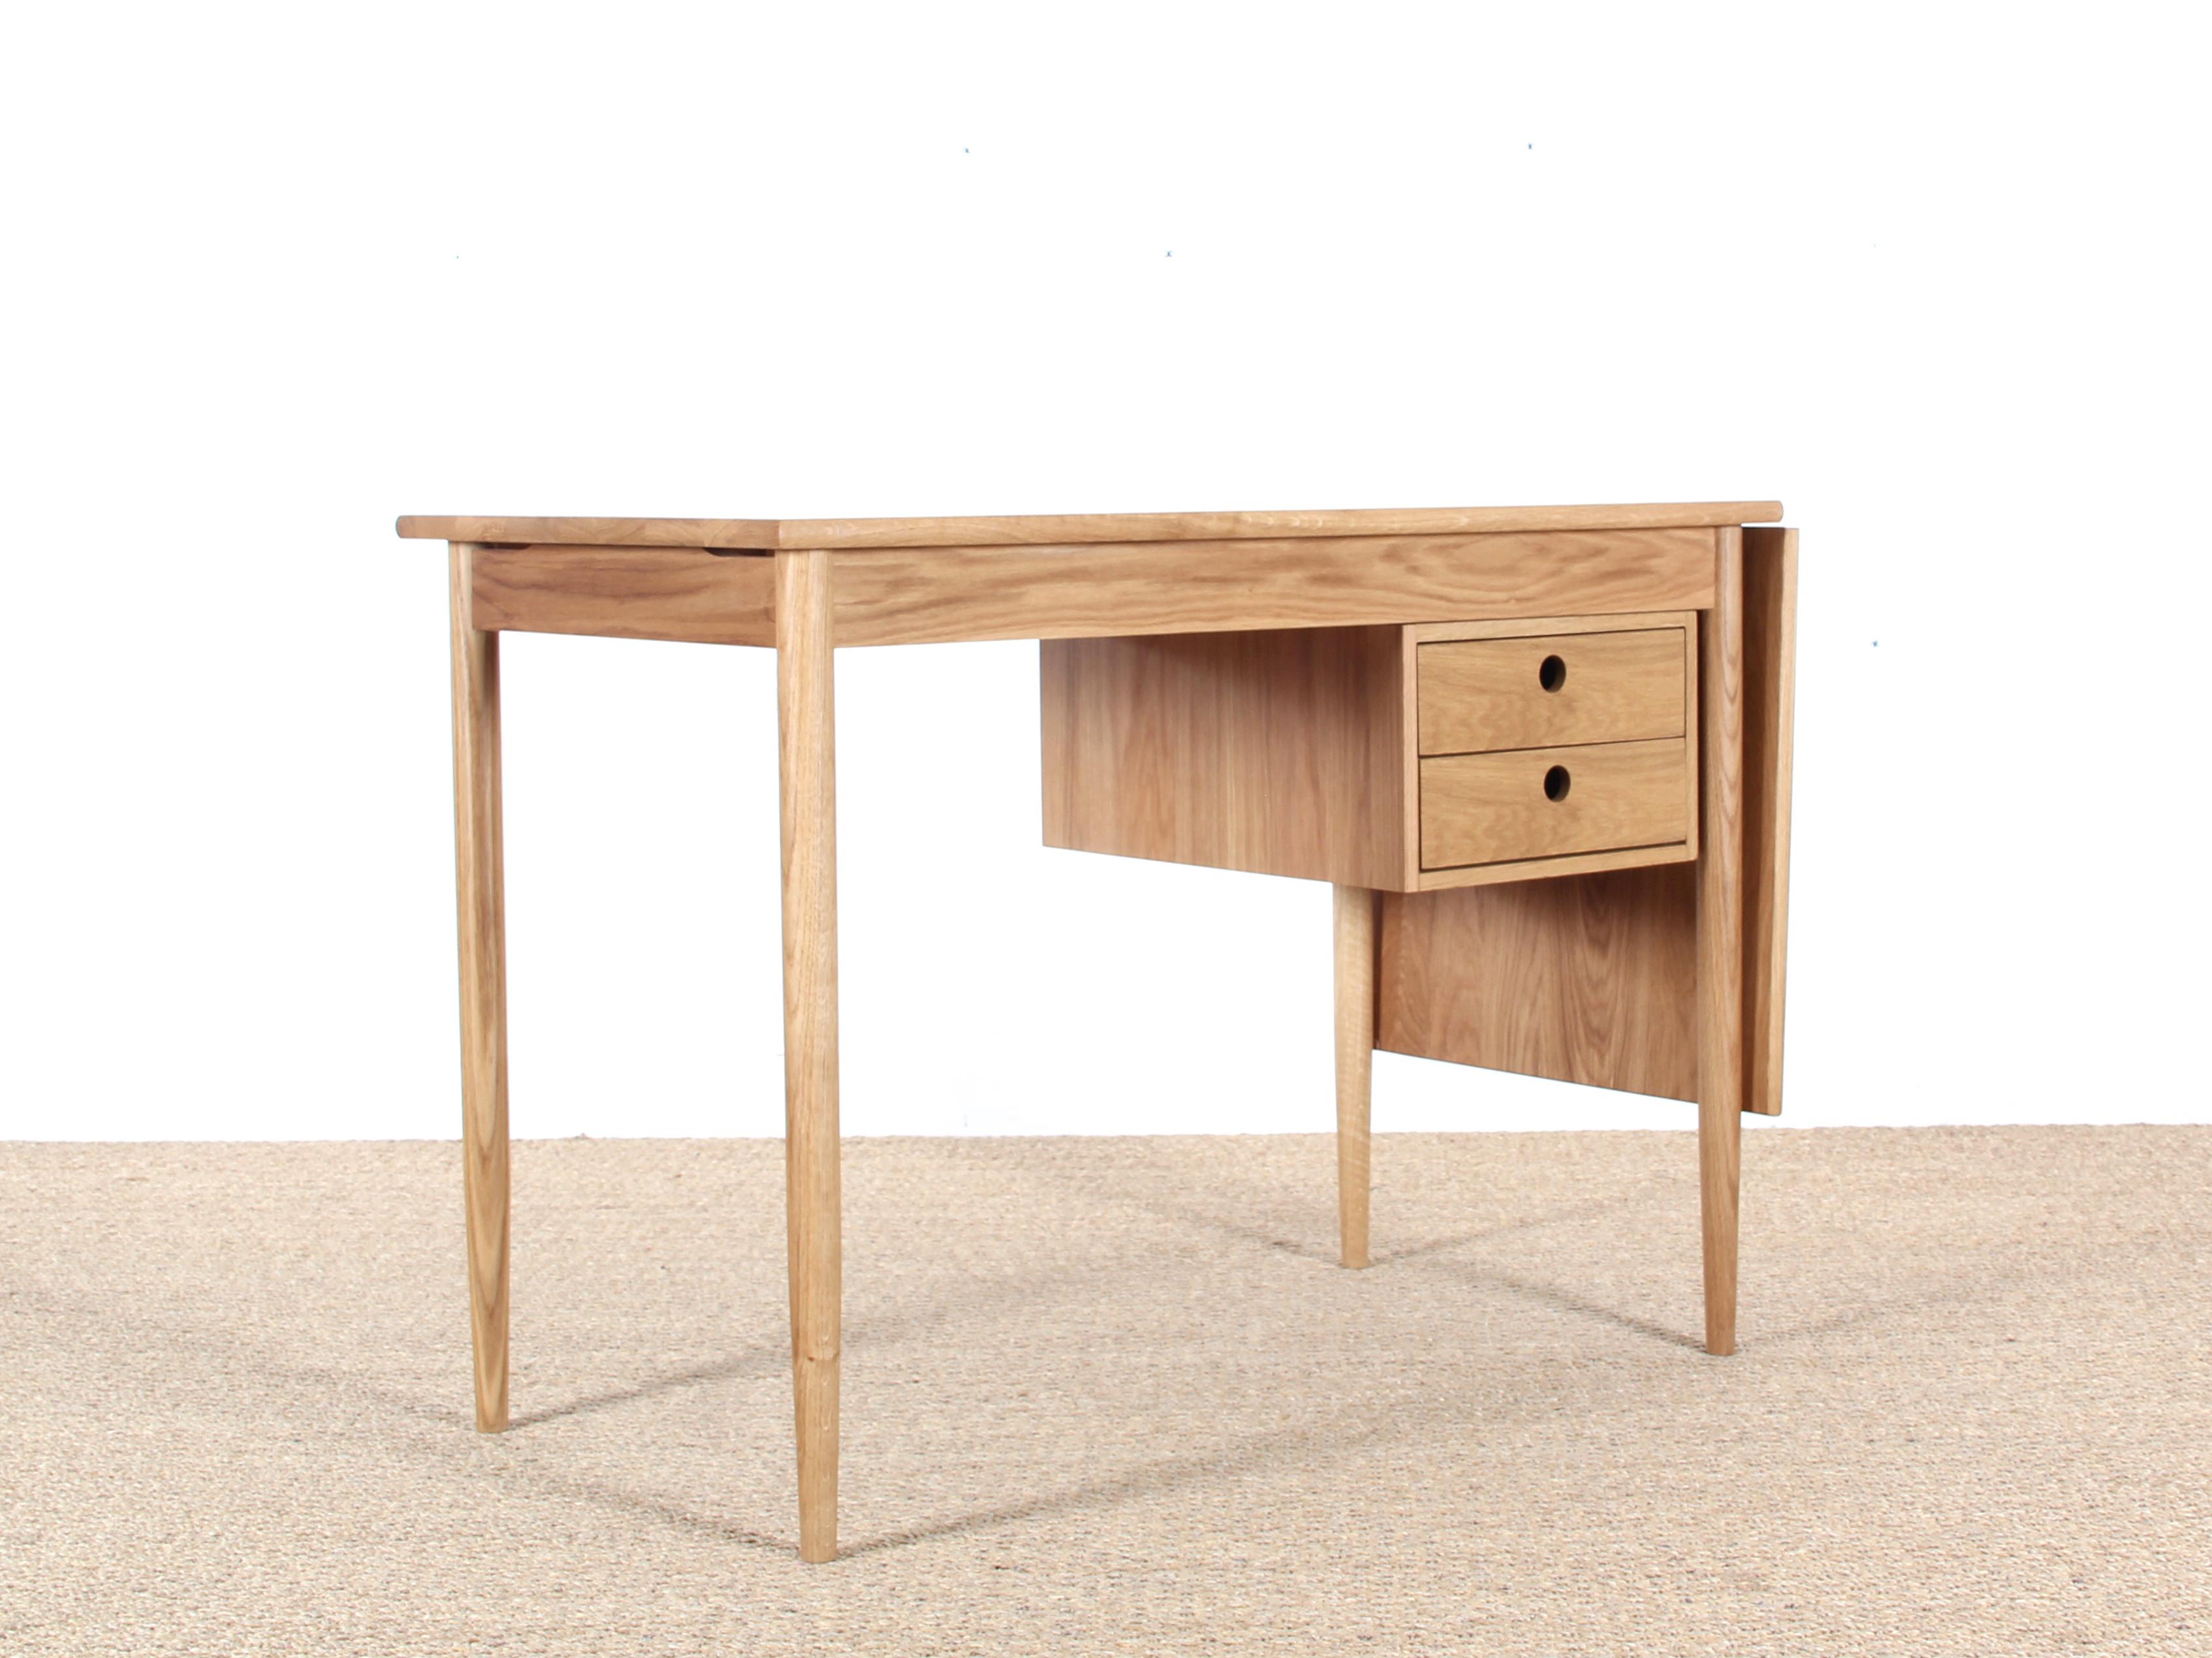 Small desk in solid oak with extensible leave and two drawers. The drawers slides to be on the right or left. Model designed by Møbler Gallery, made in France by artisans, with oak from French forests managed sustainably. Traditional cabinetmaker